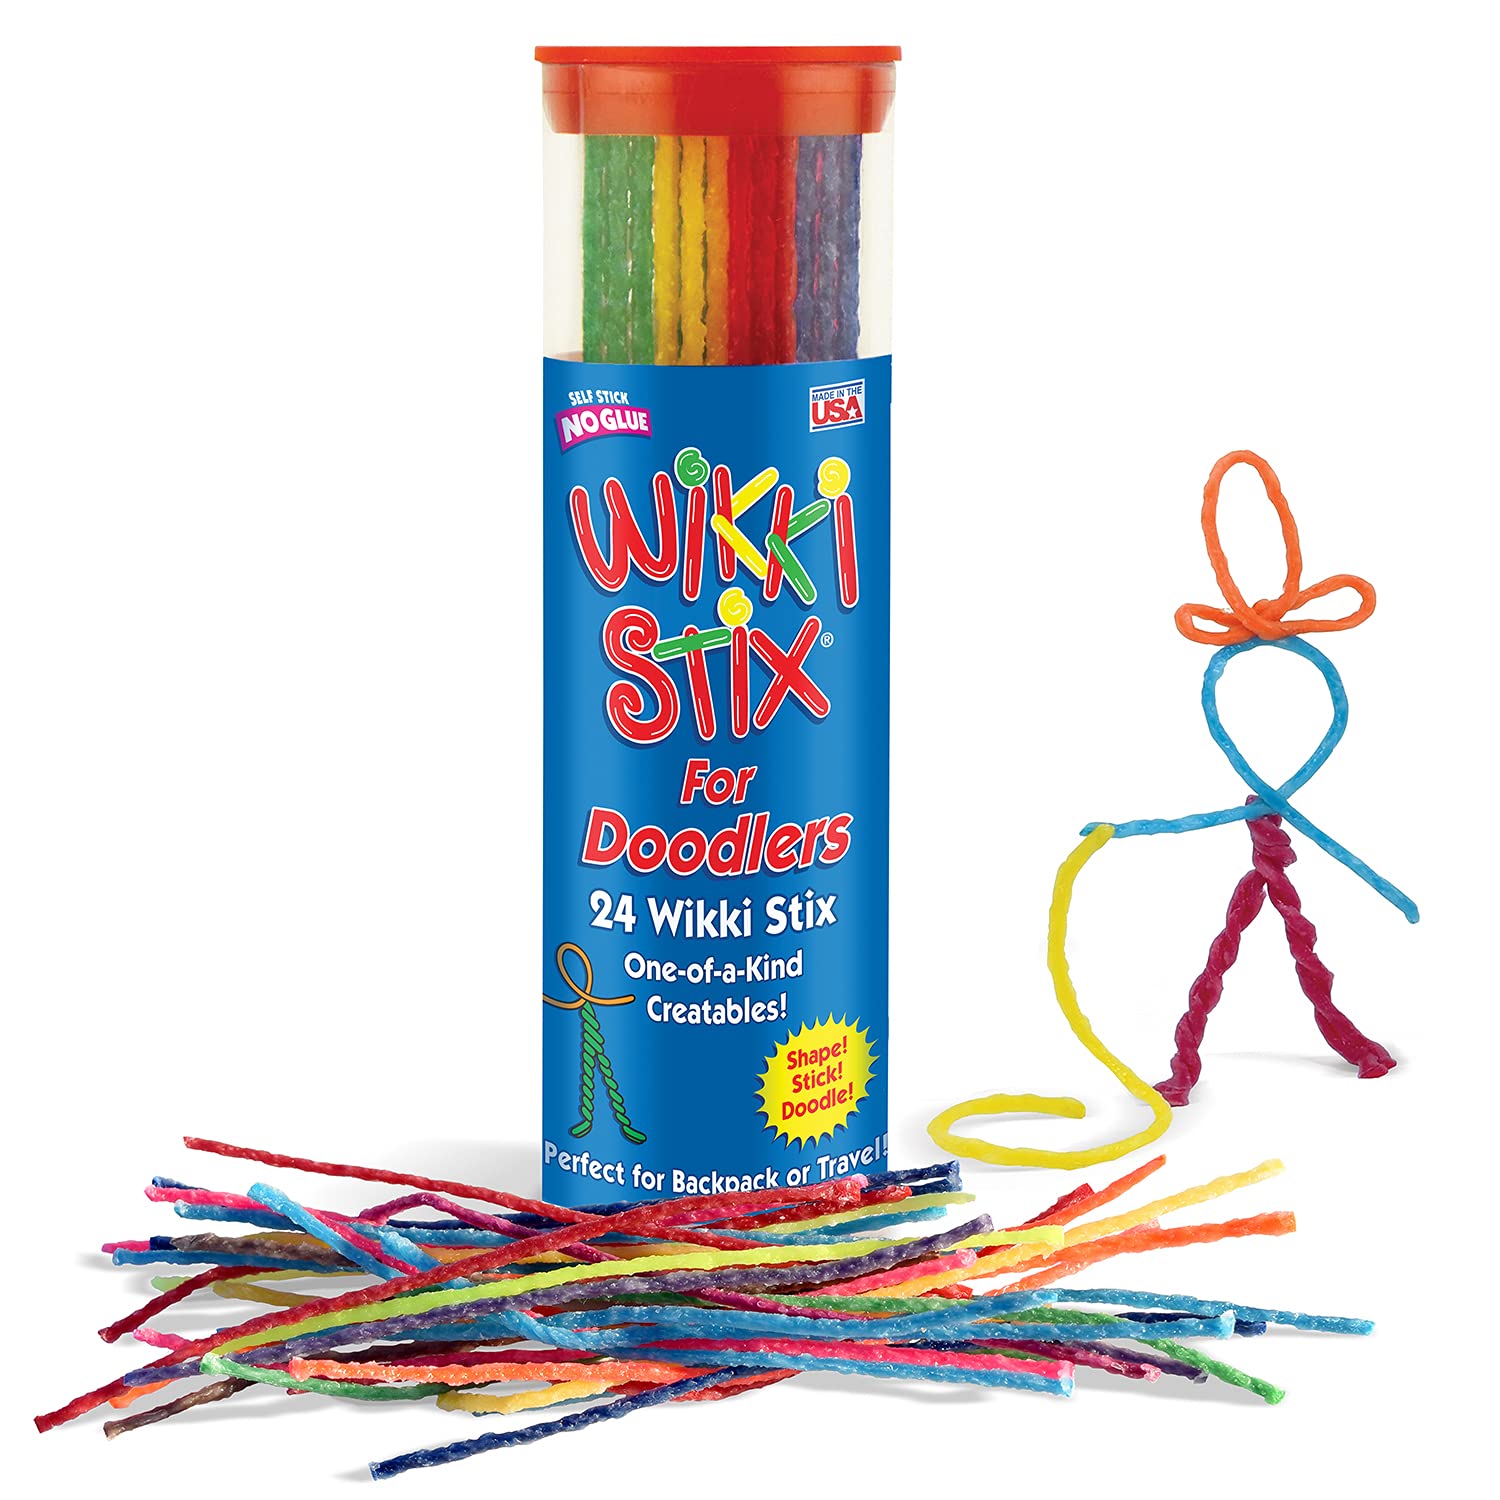 Sensory Fidget Toy, Arts and Crafts for Kids, Non-Toxic, Waxed Yarn, 6 inch, Reusable Molding and Sculpting Sticks, American Made by Wikki Stix, Assorted Colors, 24 Pack,Multi.